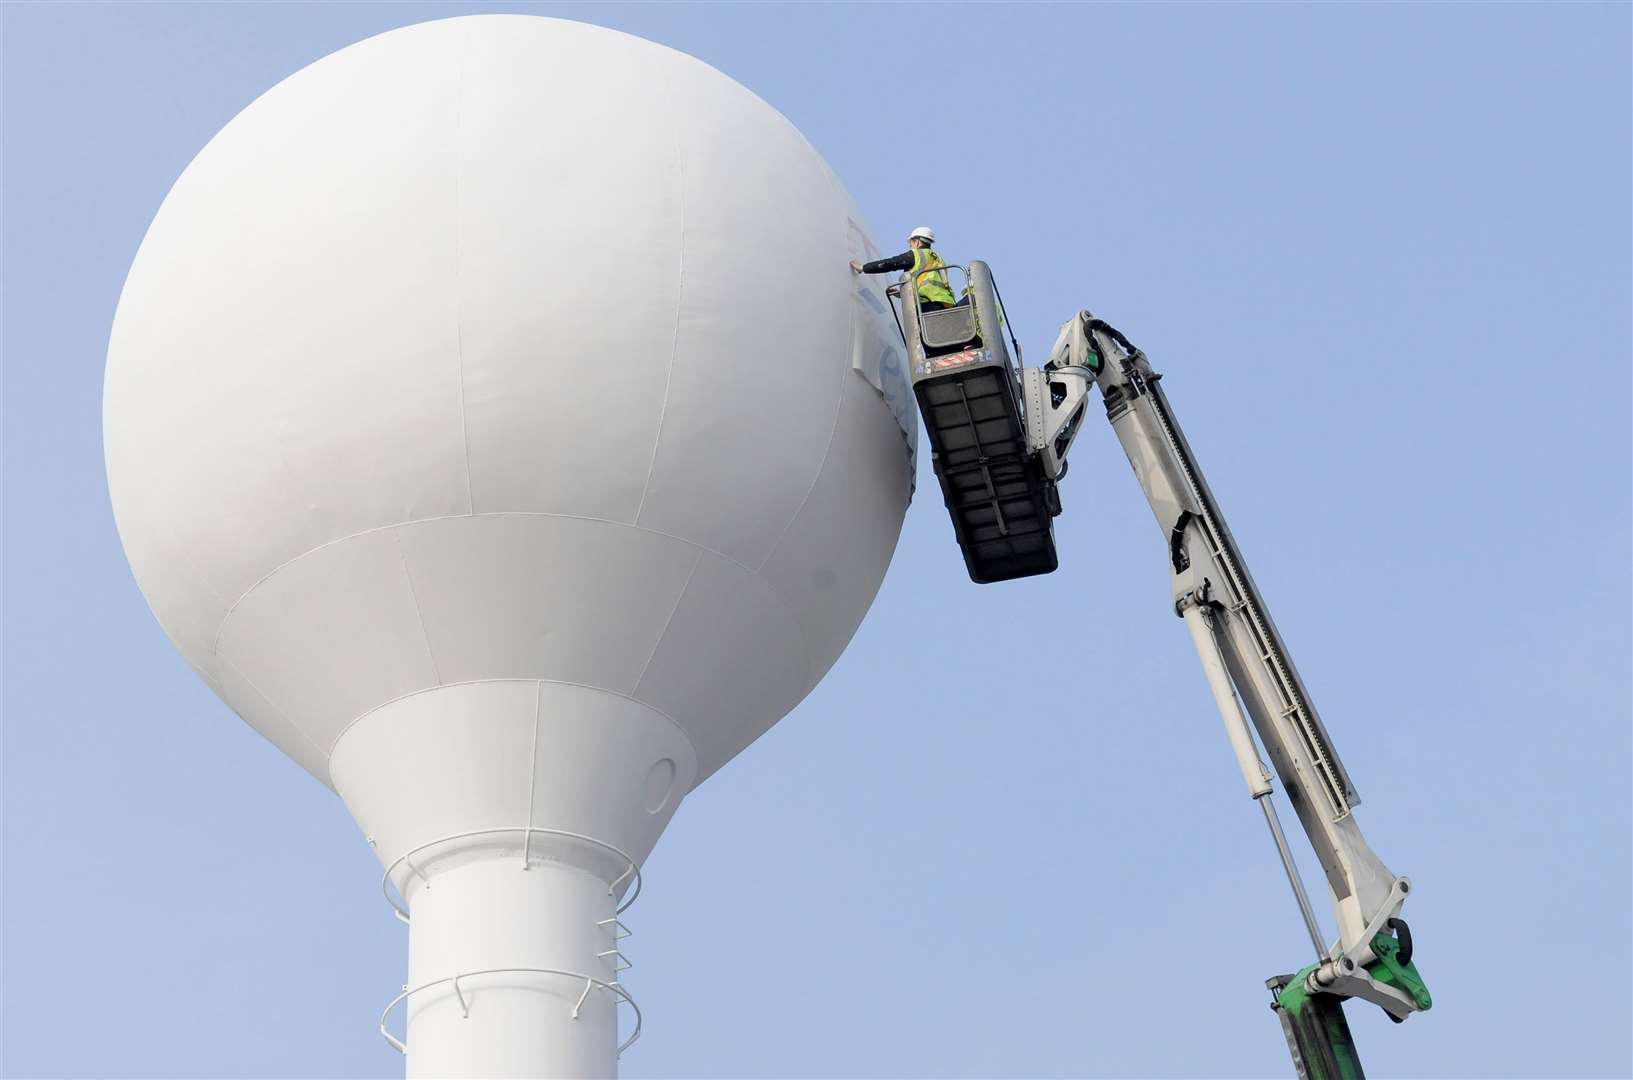 The water tower being repainted back in 2011 after a refurbishment at the Tesco store. Picture: Andy Payton